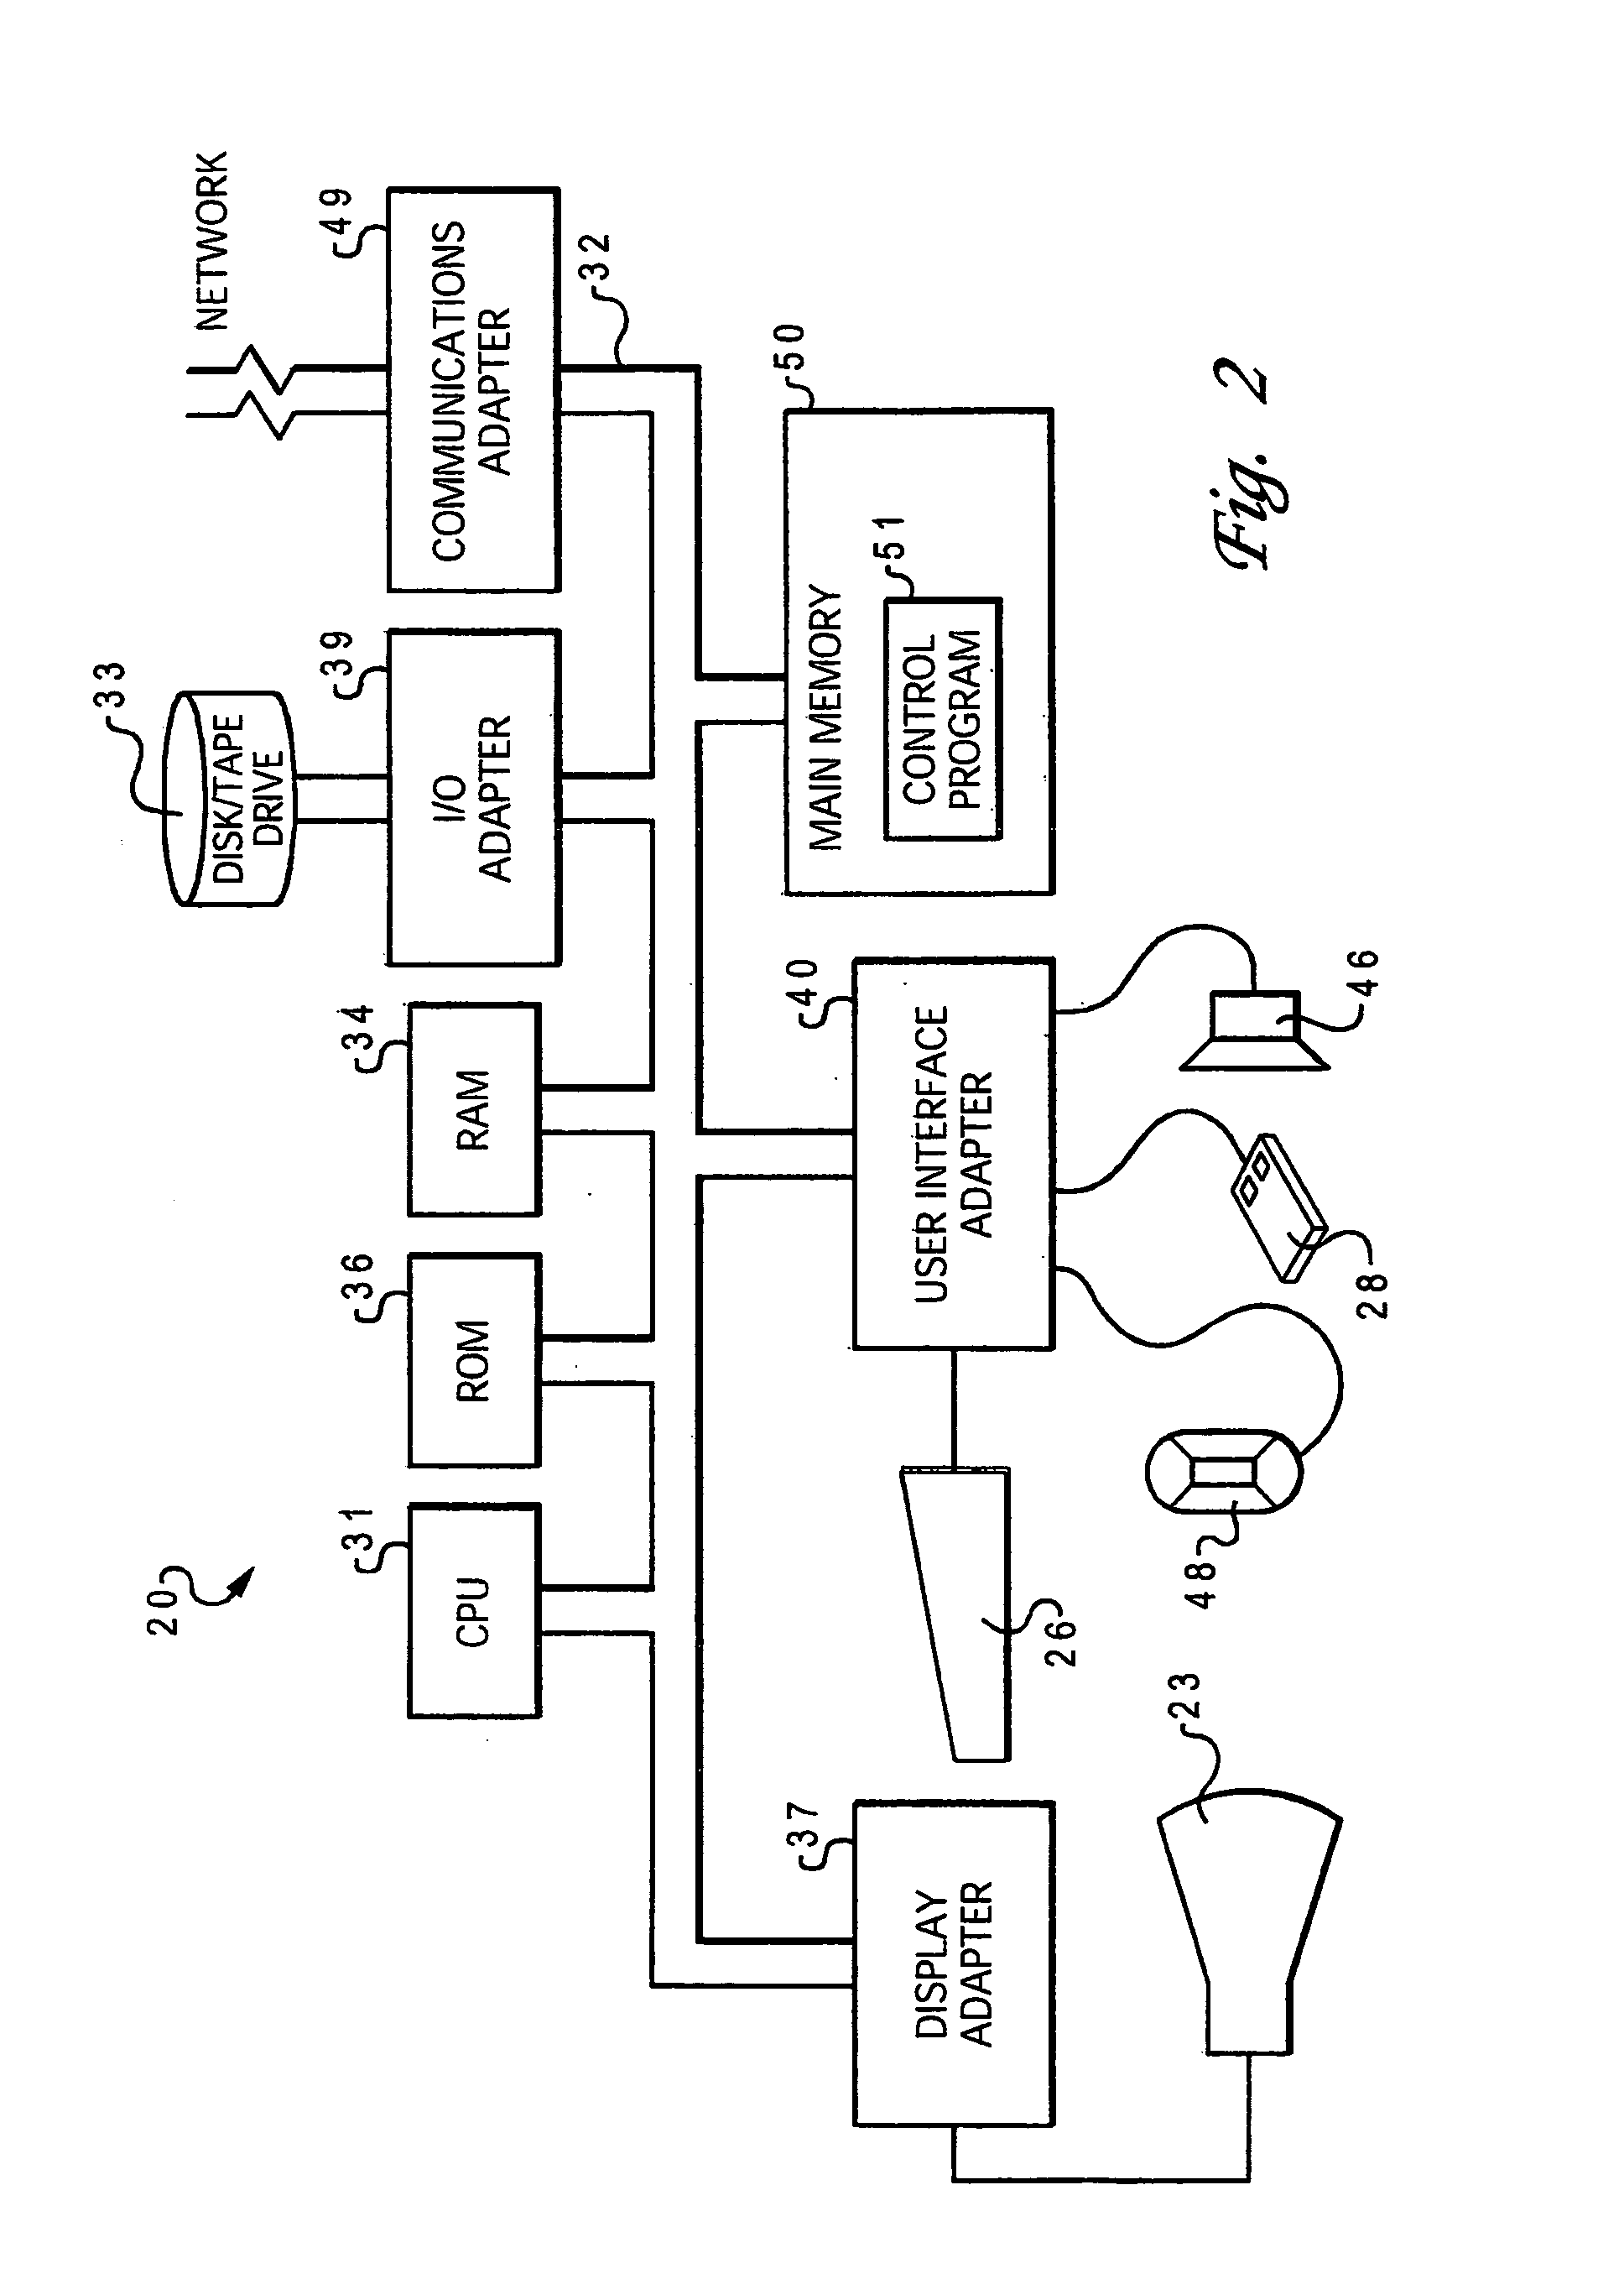 Method and system for touch screen keyboard and display space sharing